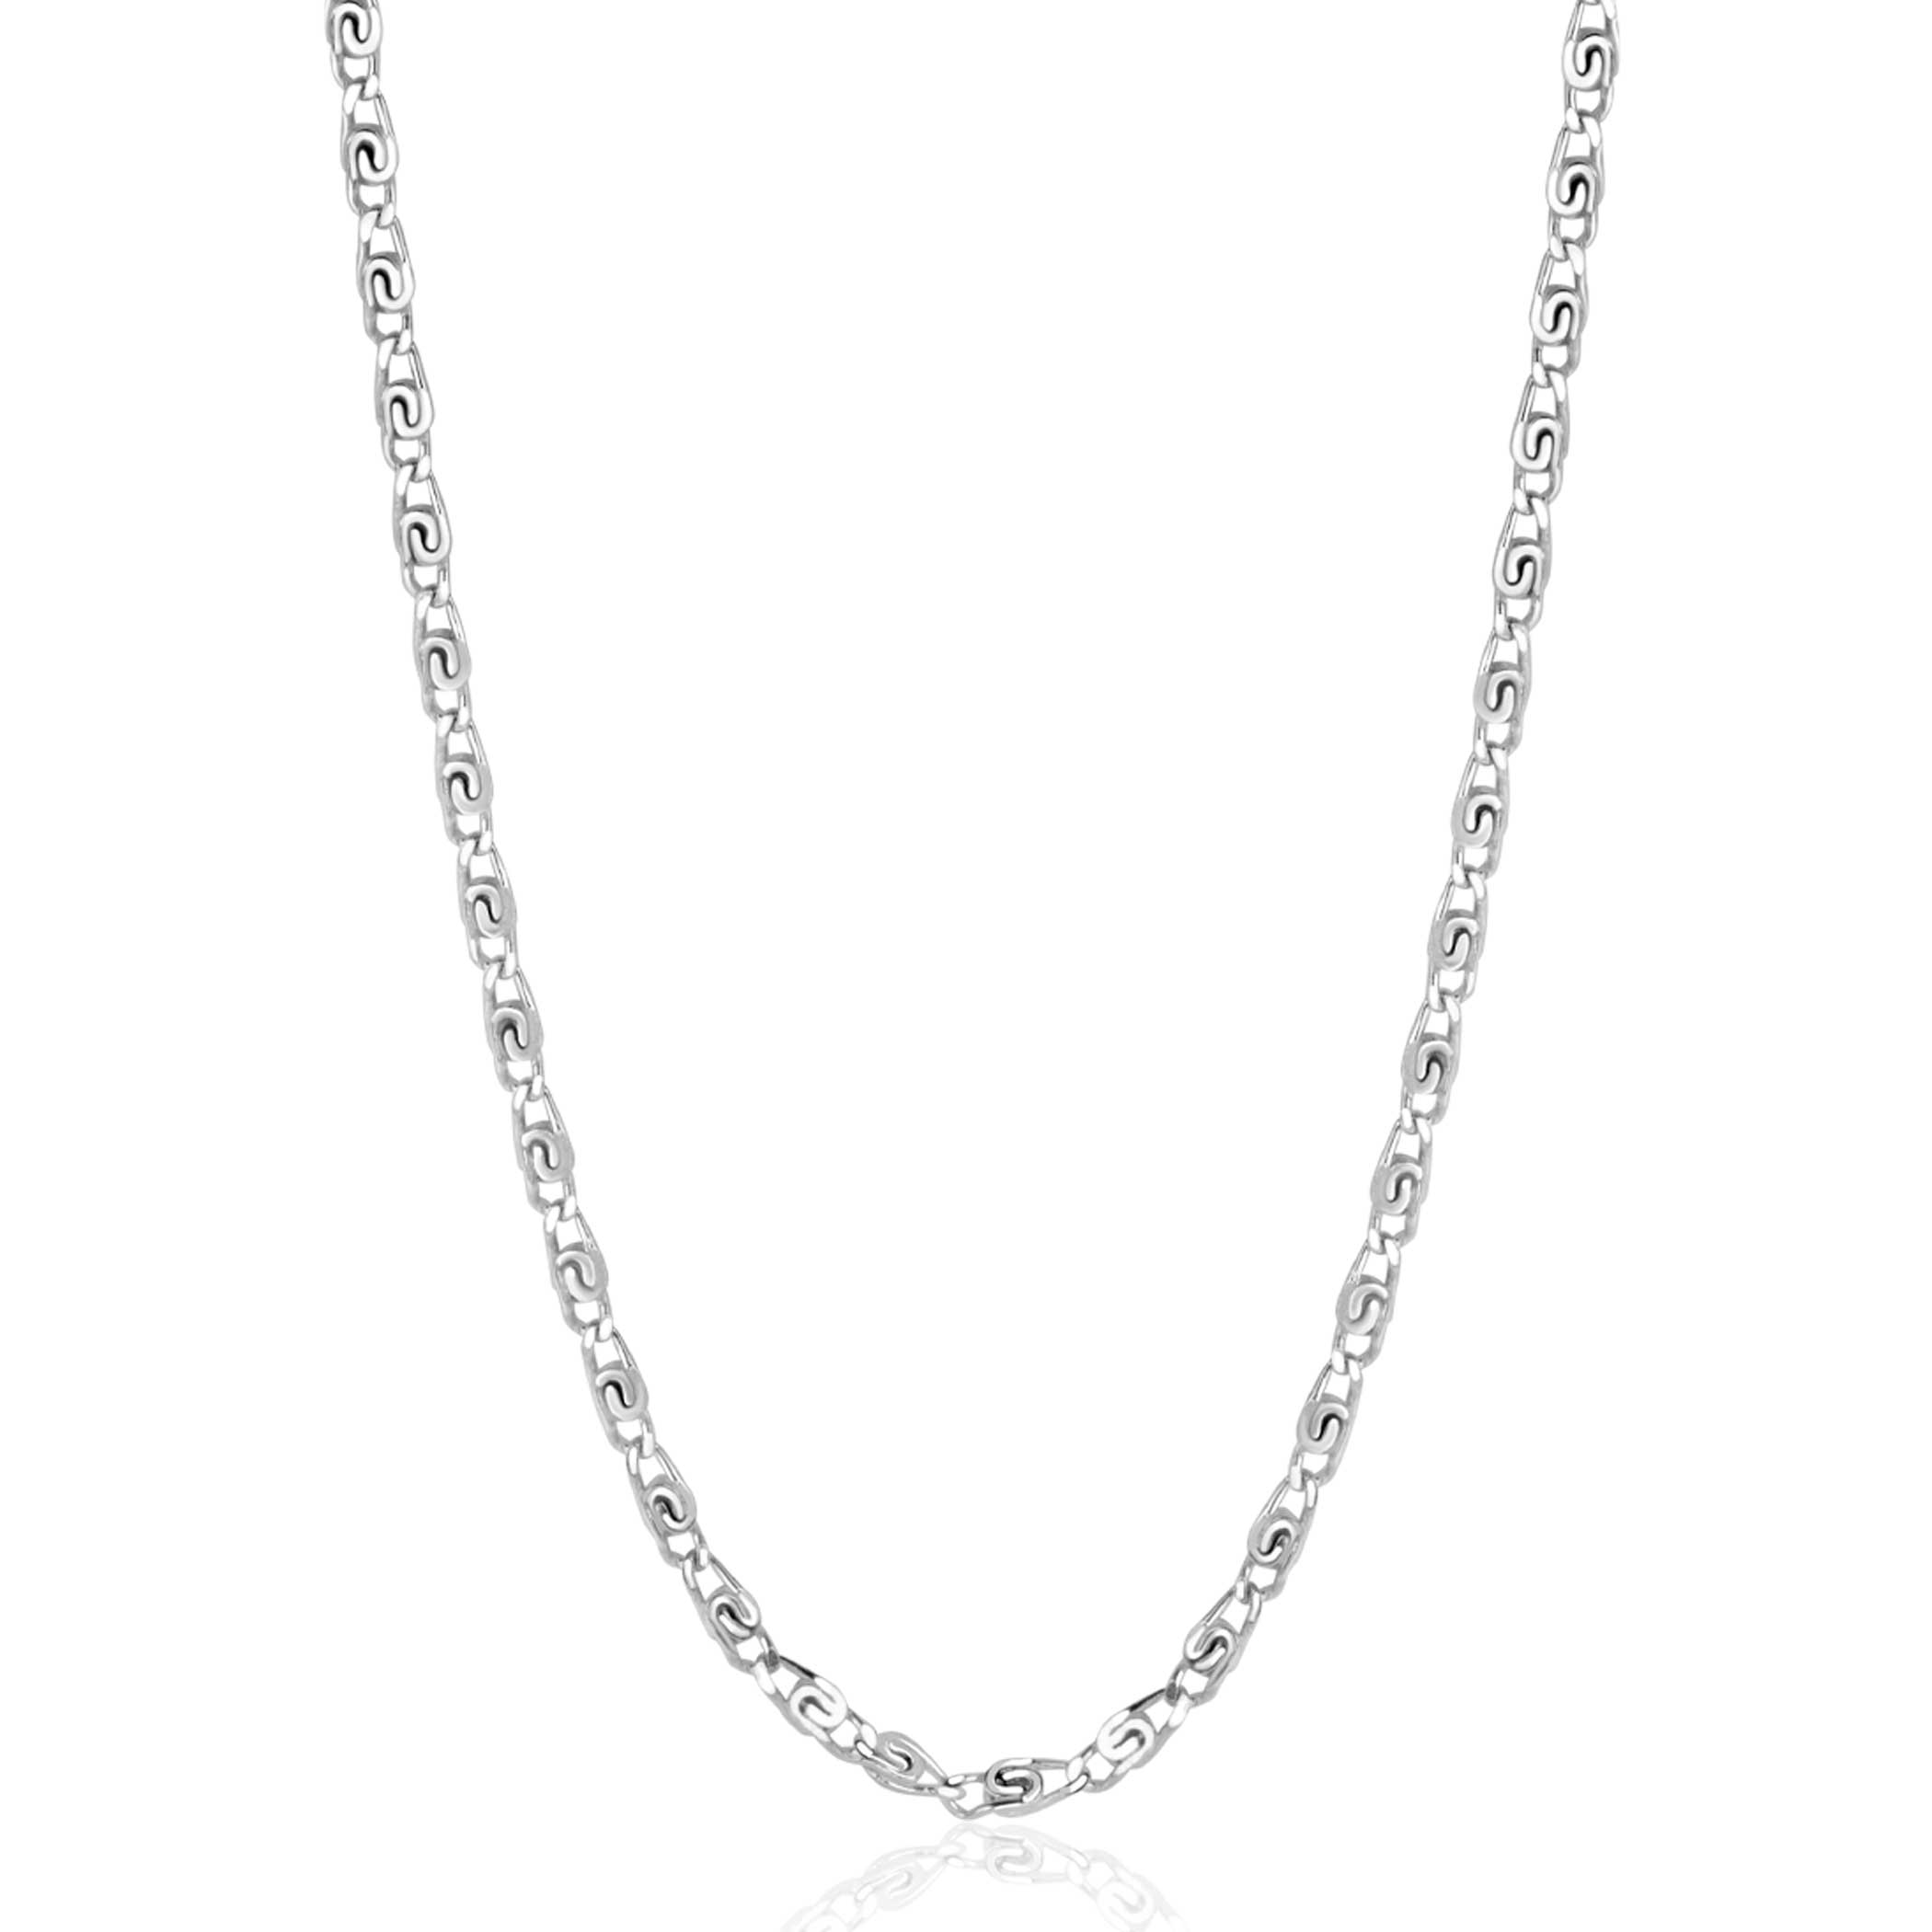 ZINZI Sterling Silver Scroll Chain Necklace with Double Twisted Chains width 42-45cm ZIC2479